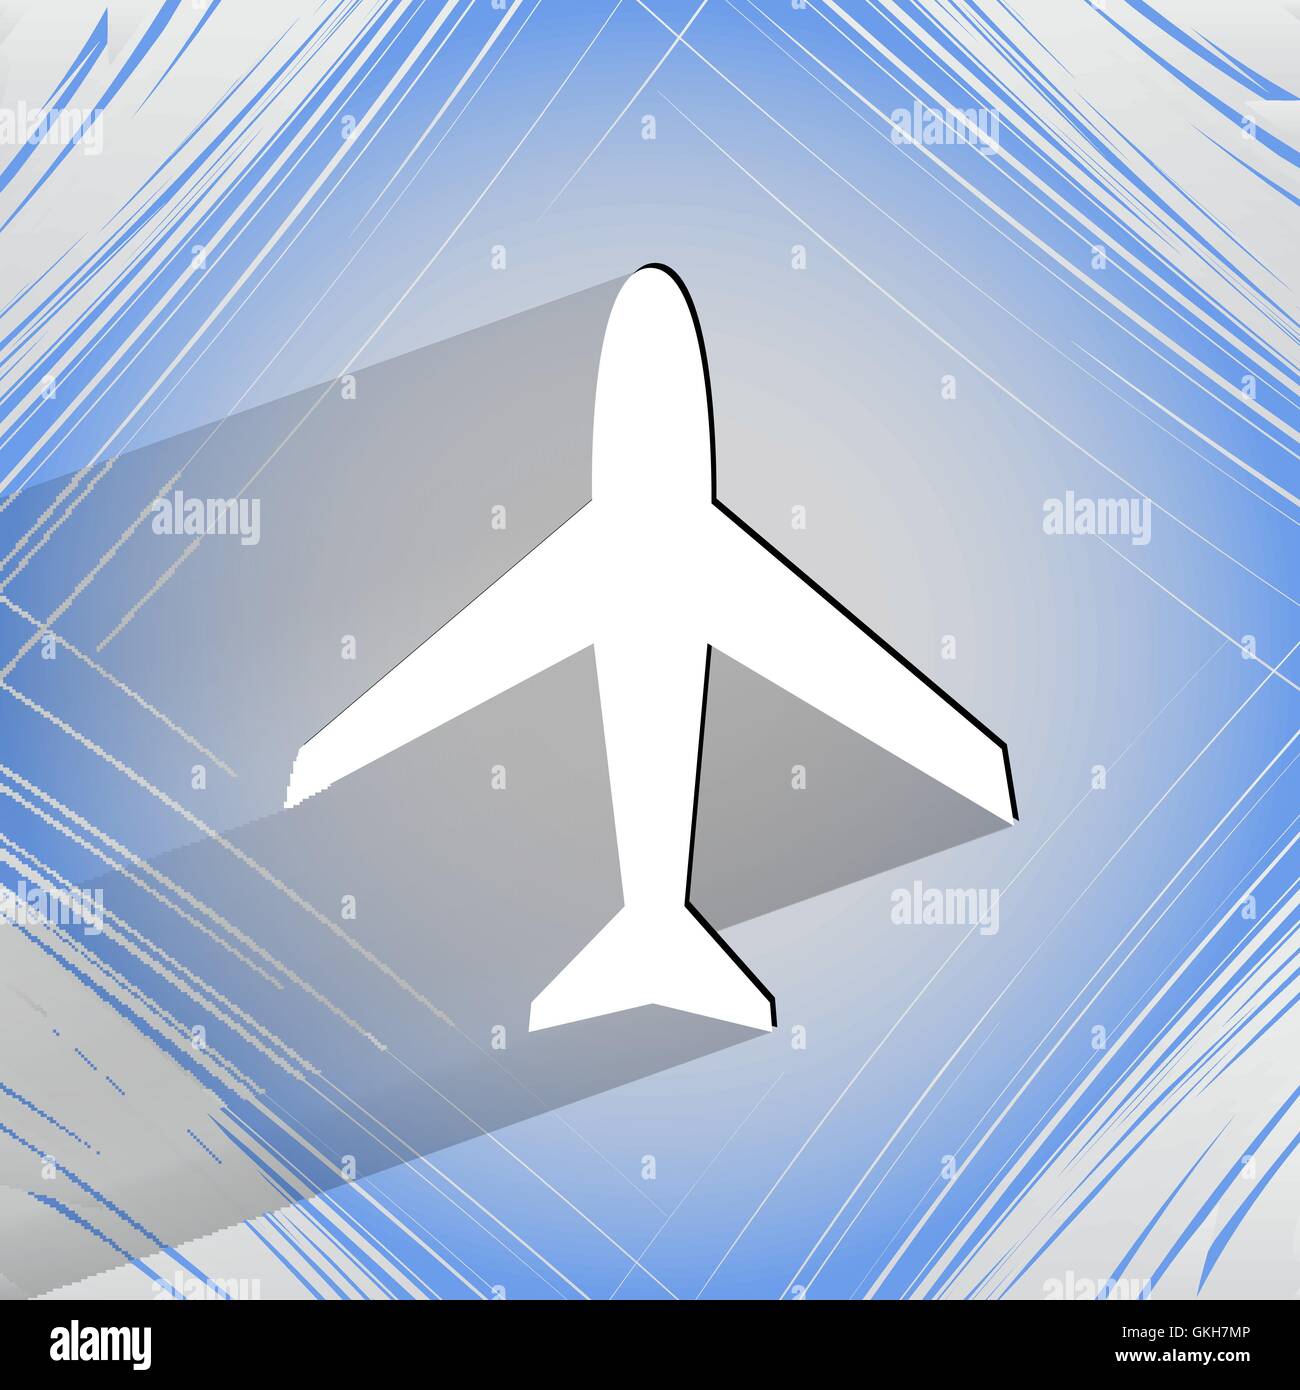 Plane . Flat modern web design on a flat geometric abstract background Stock Vector